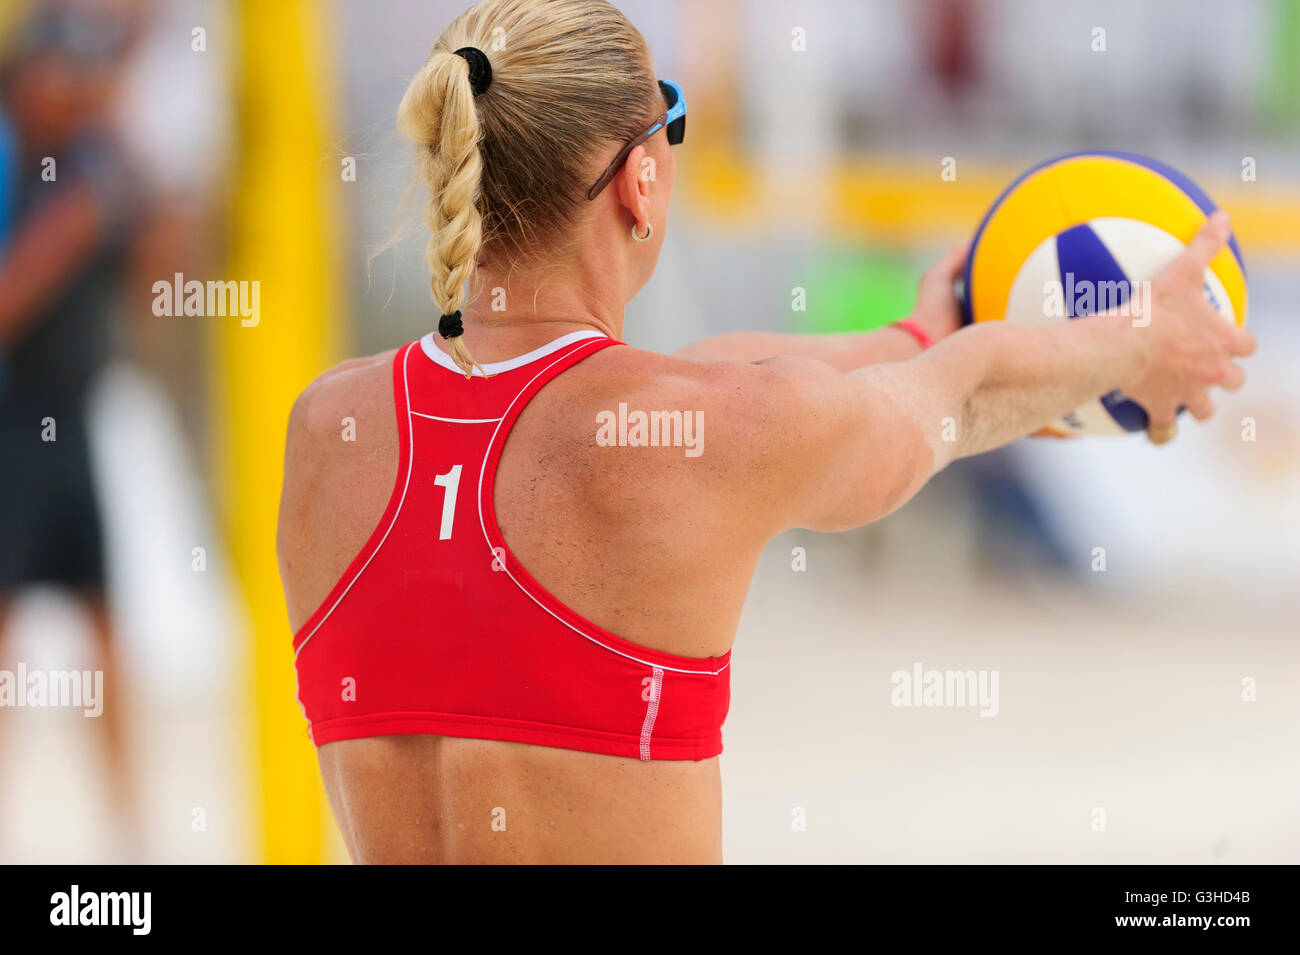 Volleyball player is a female athlete volley ball player getting ready to serve the ball. Stock Photo